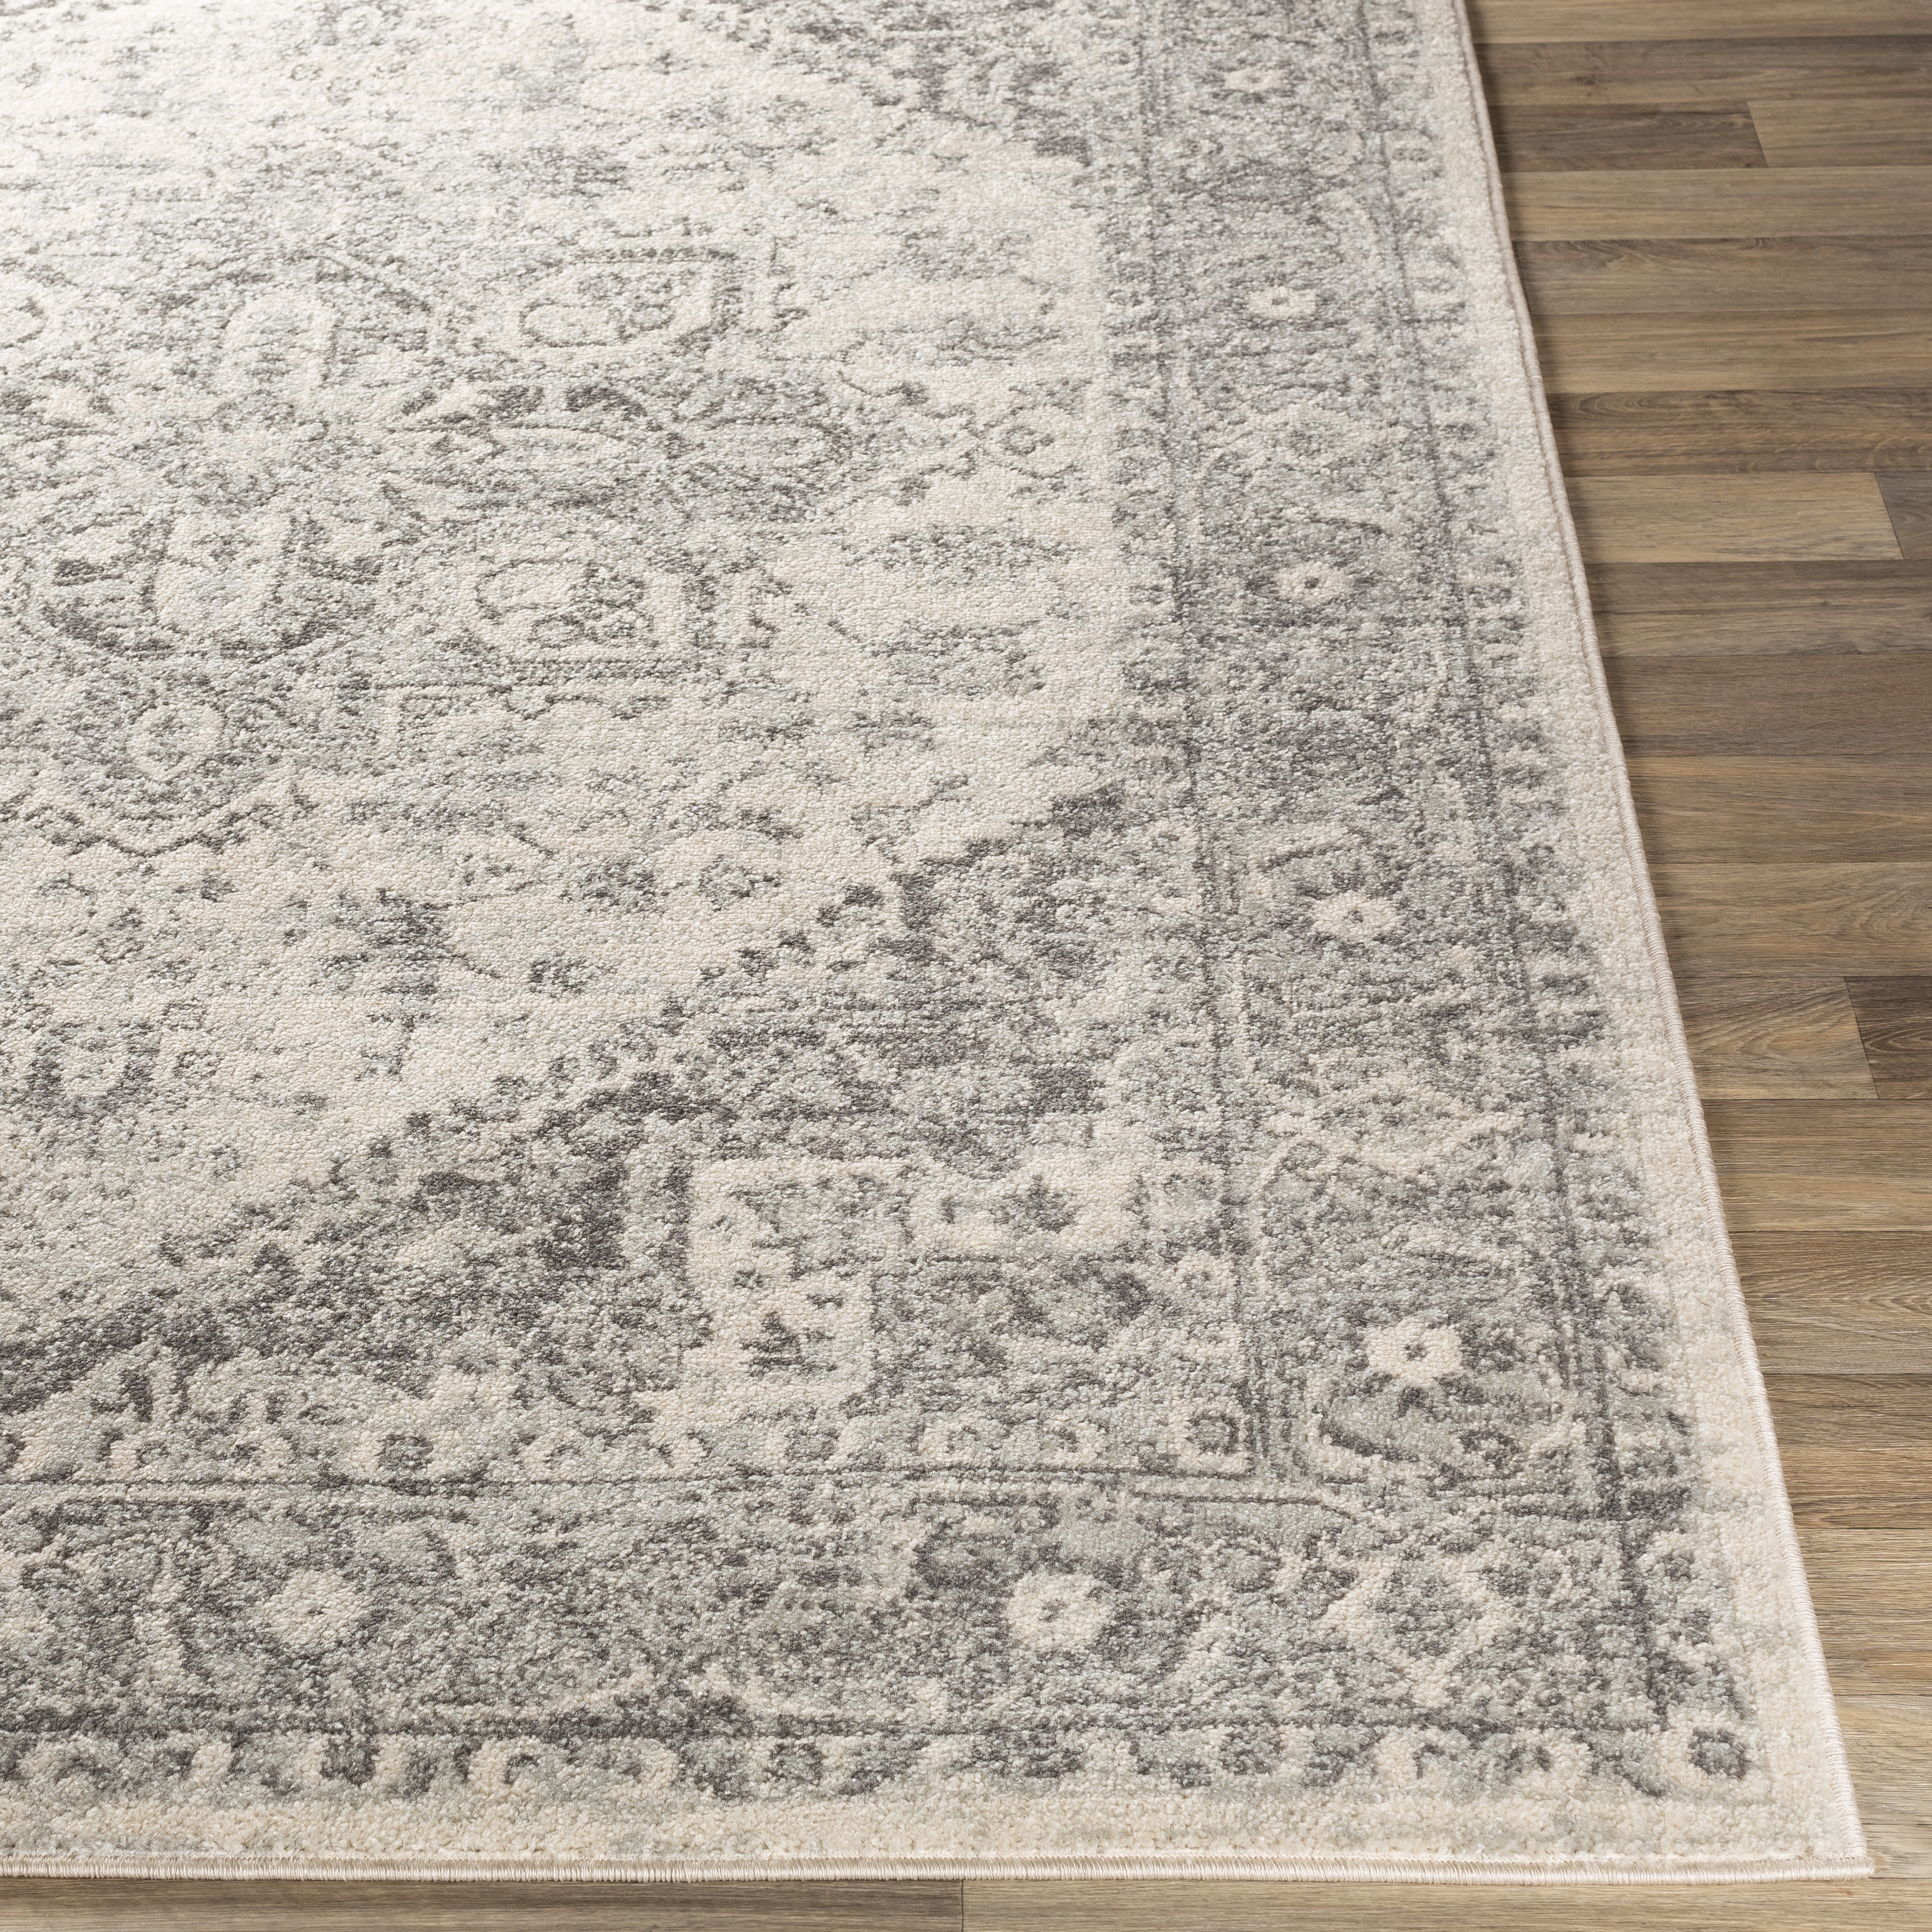 Chester Rug, 7'10" x 10'2" - Image 1